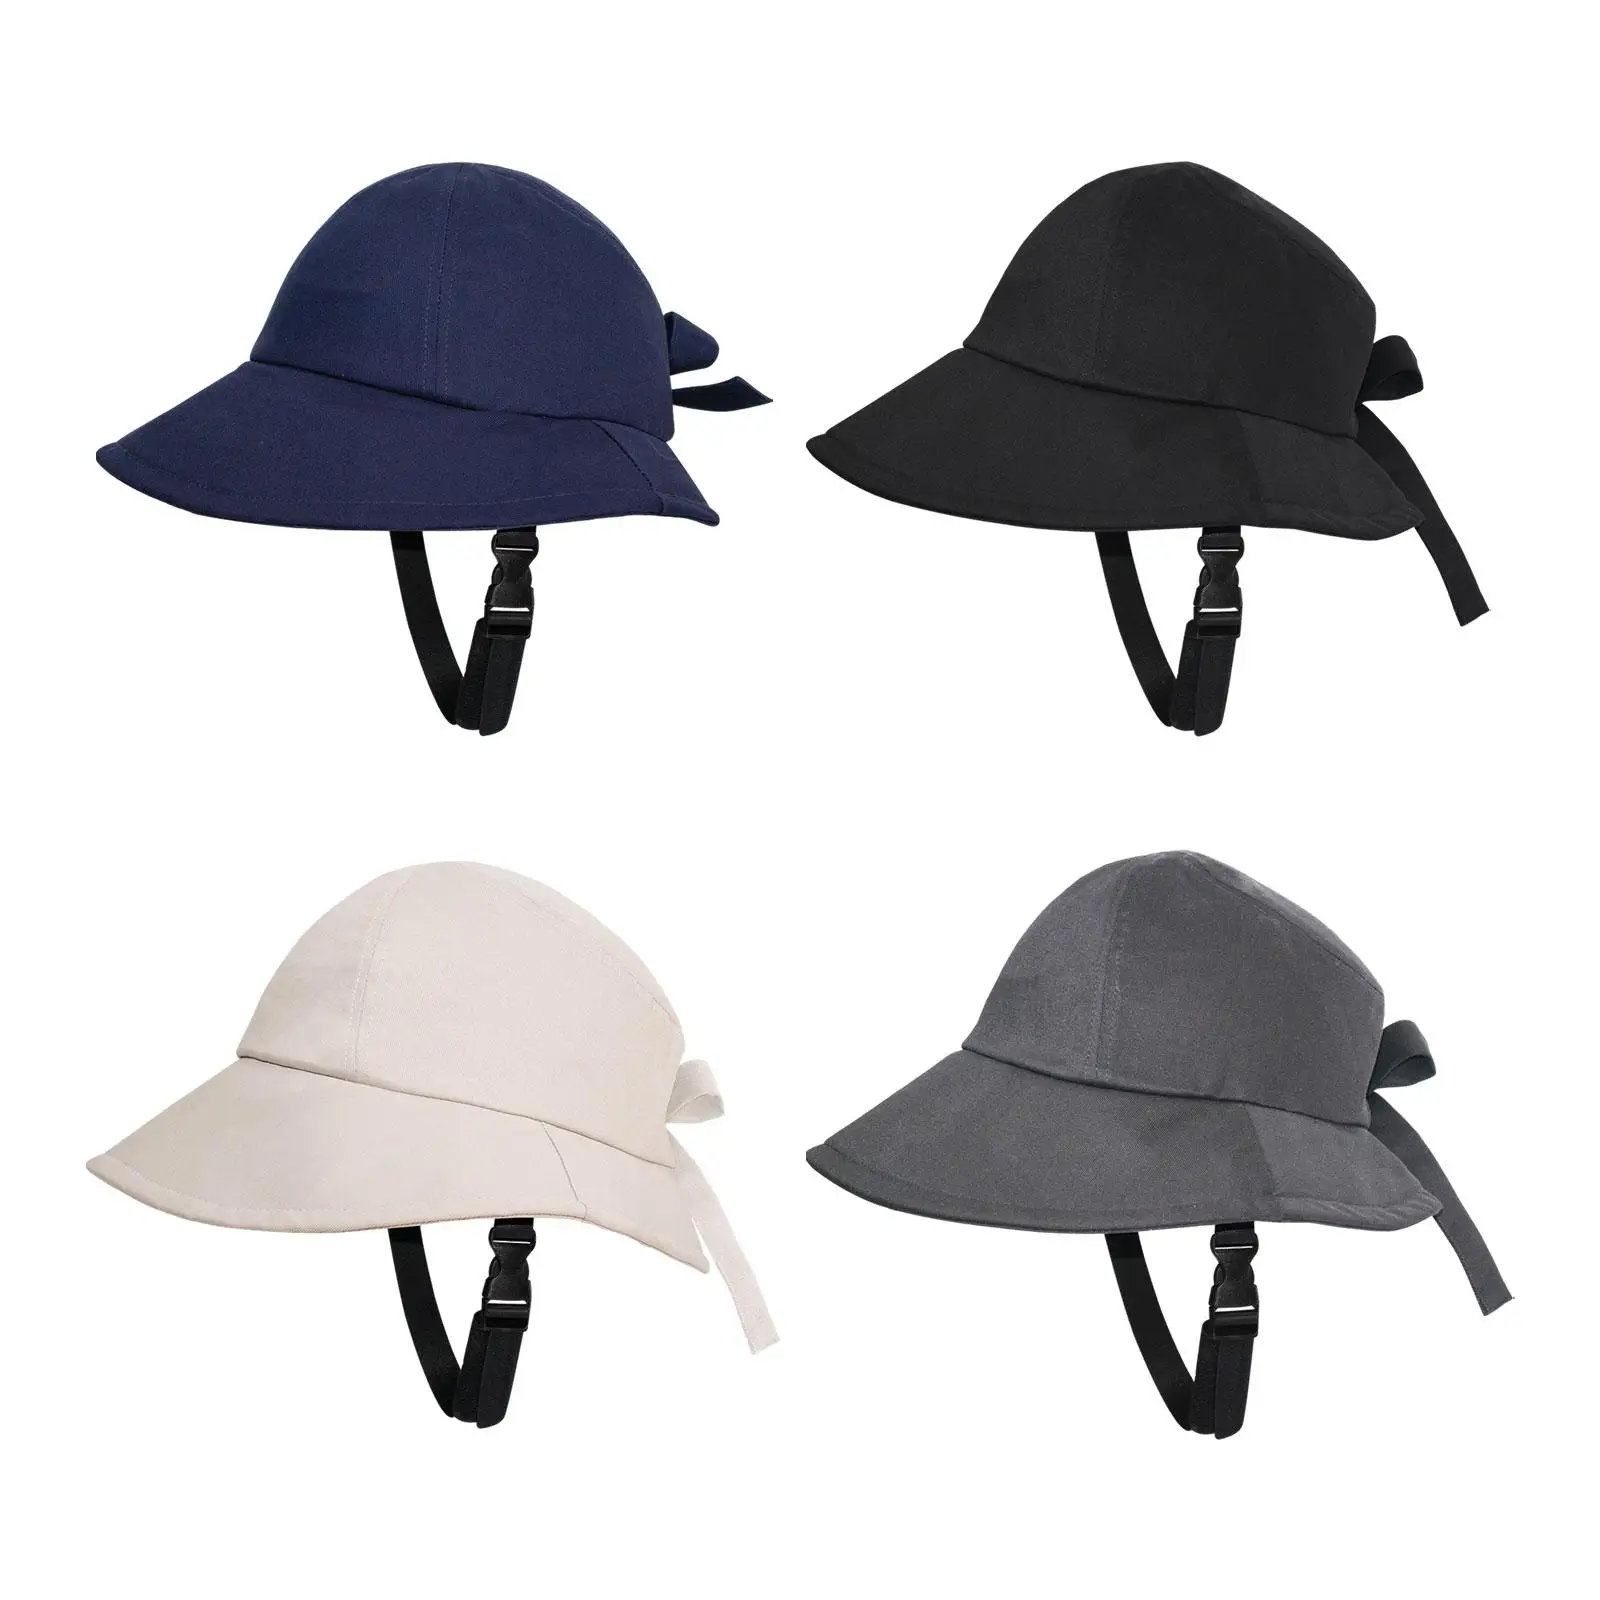 Women Bucket Hat Fashion with Adjustable Buckle Packable Foldable Breathable Fishing Cap for Vacation Camping Outdoor Travel